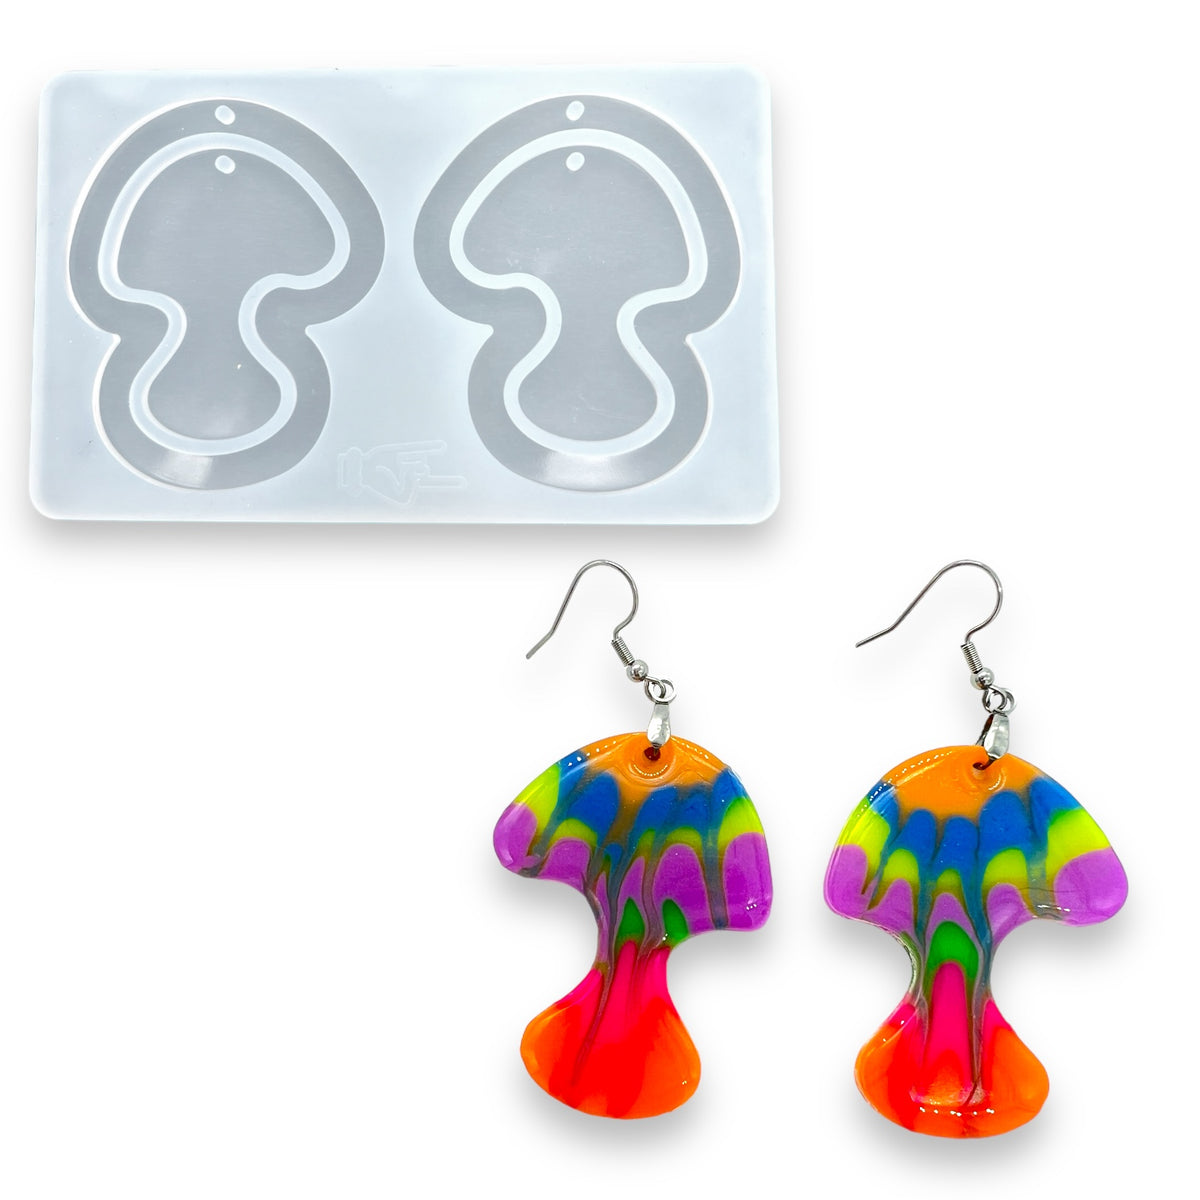 Resin Rockers Exclusive Premium Dual Mushroom Dangle Earring Mold for UV and Epoxy Resin Art Jewelry